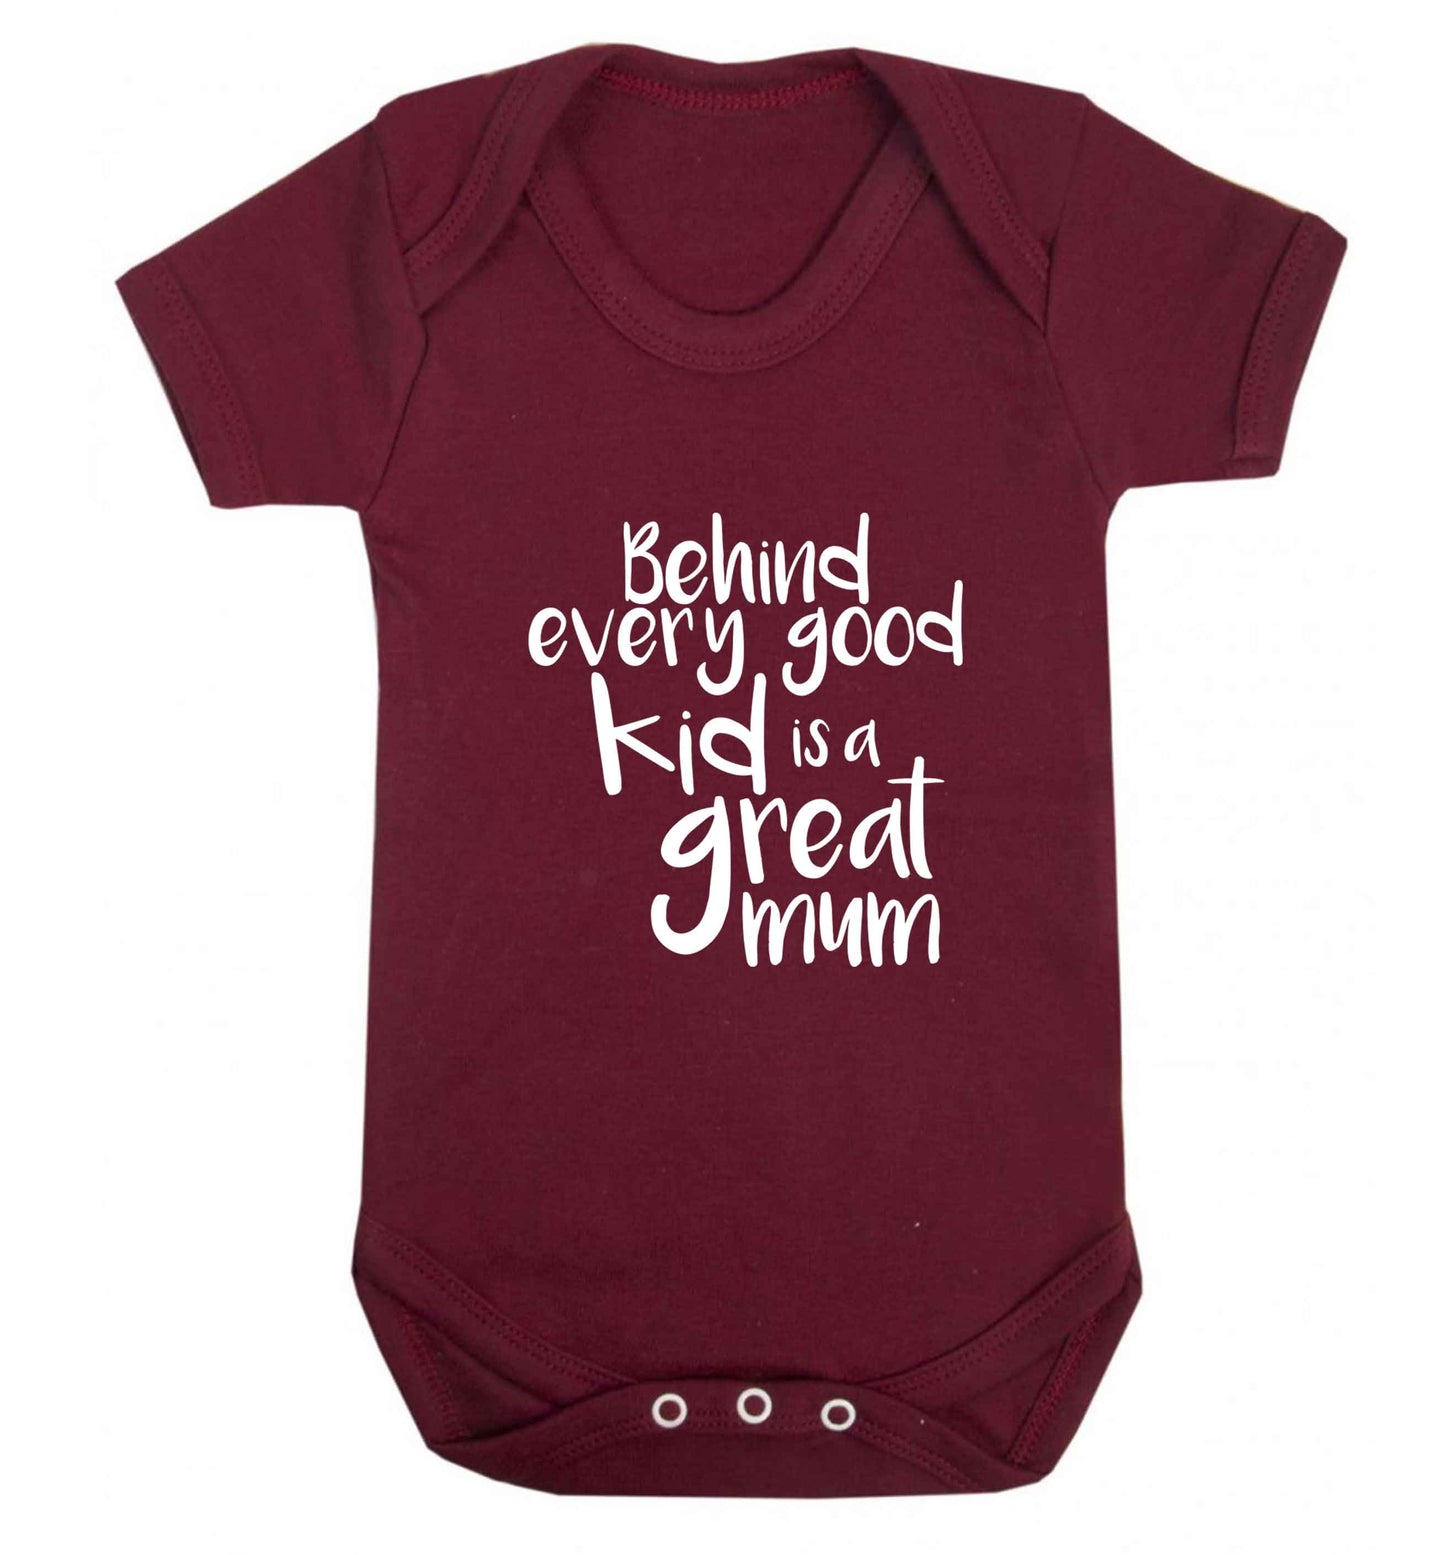 Behind every good kid is a great mum baby vest maroon 18-24 months